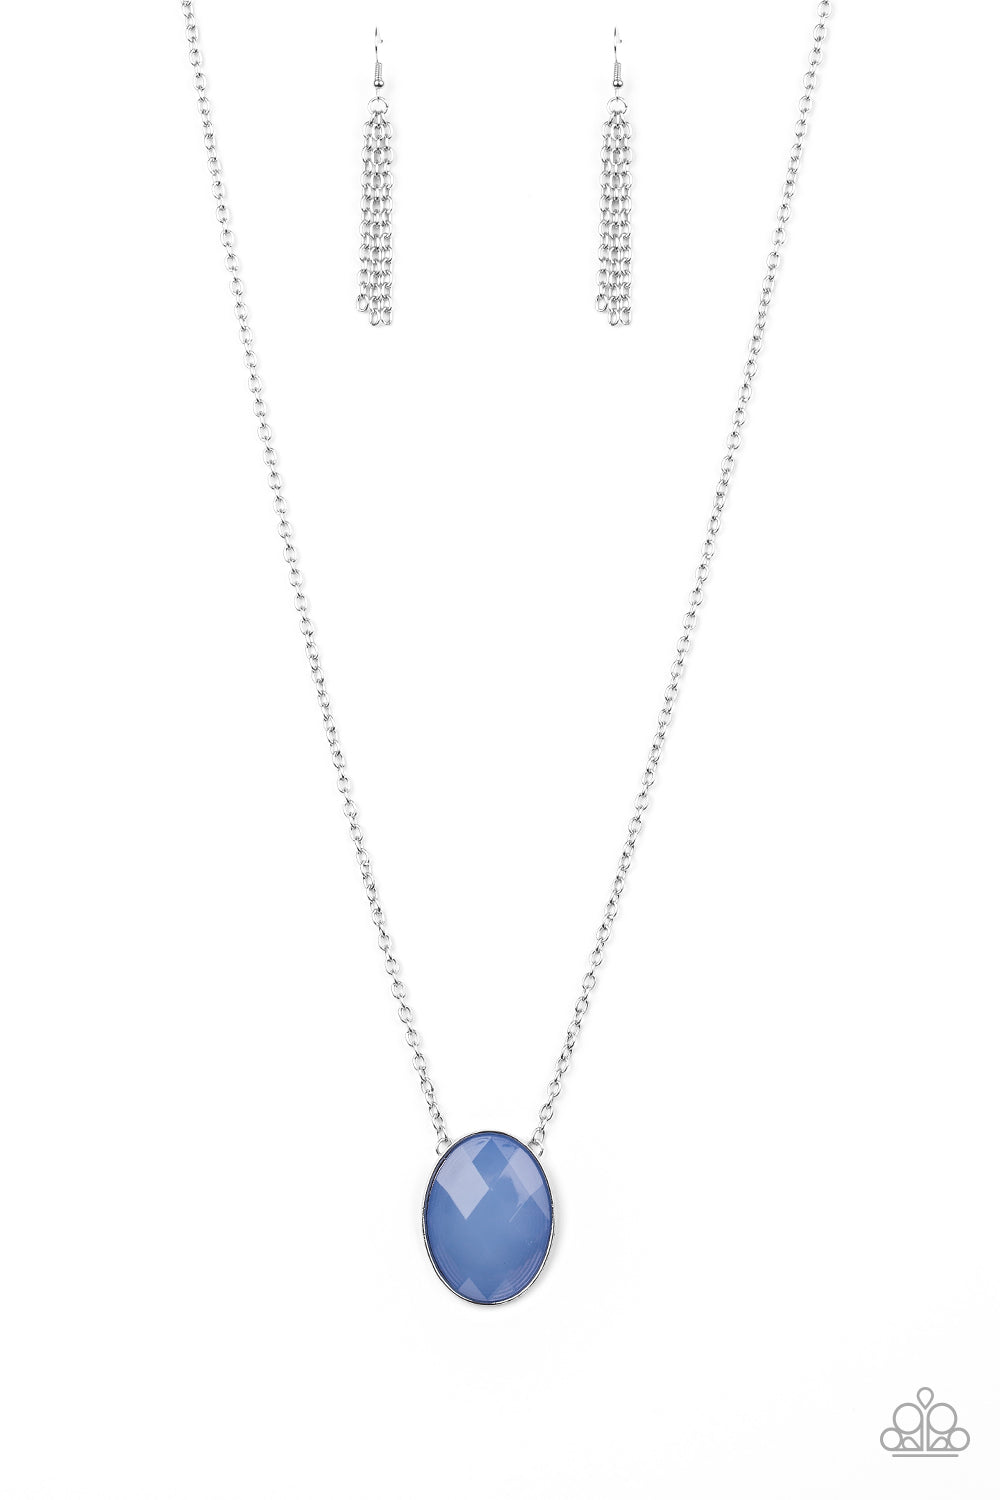 INTENSELY ILLUMINATED - BLUE NECKLACE